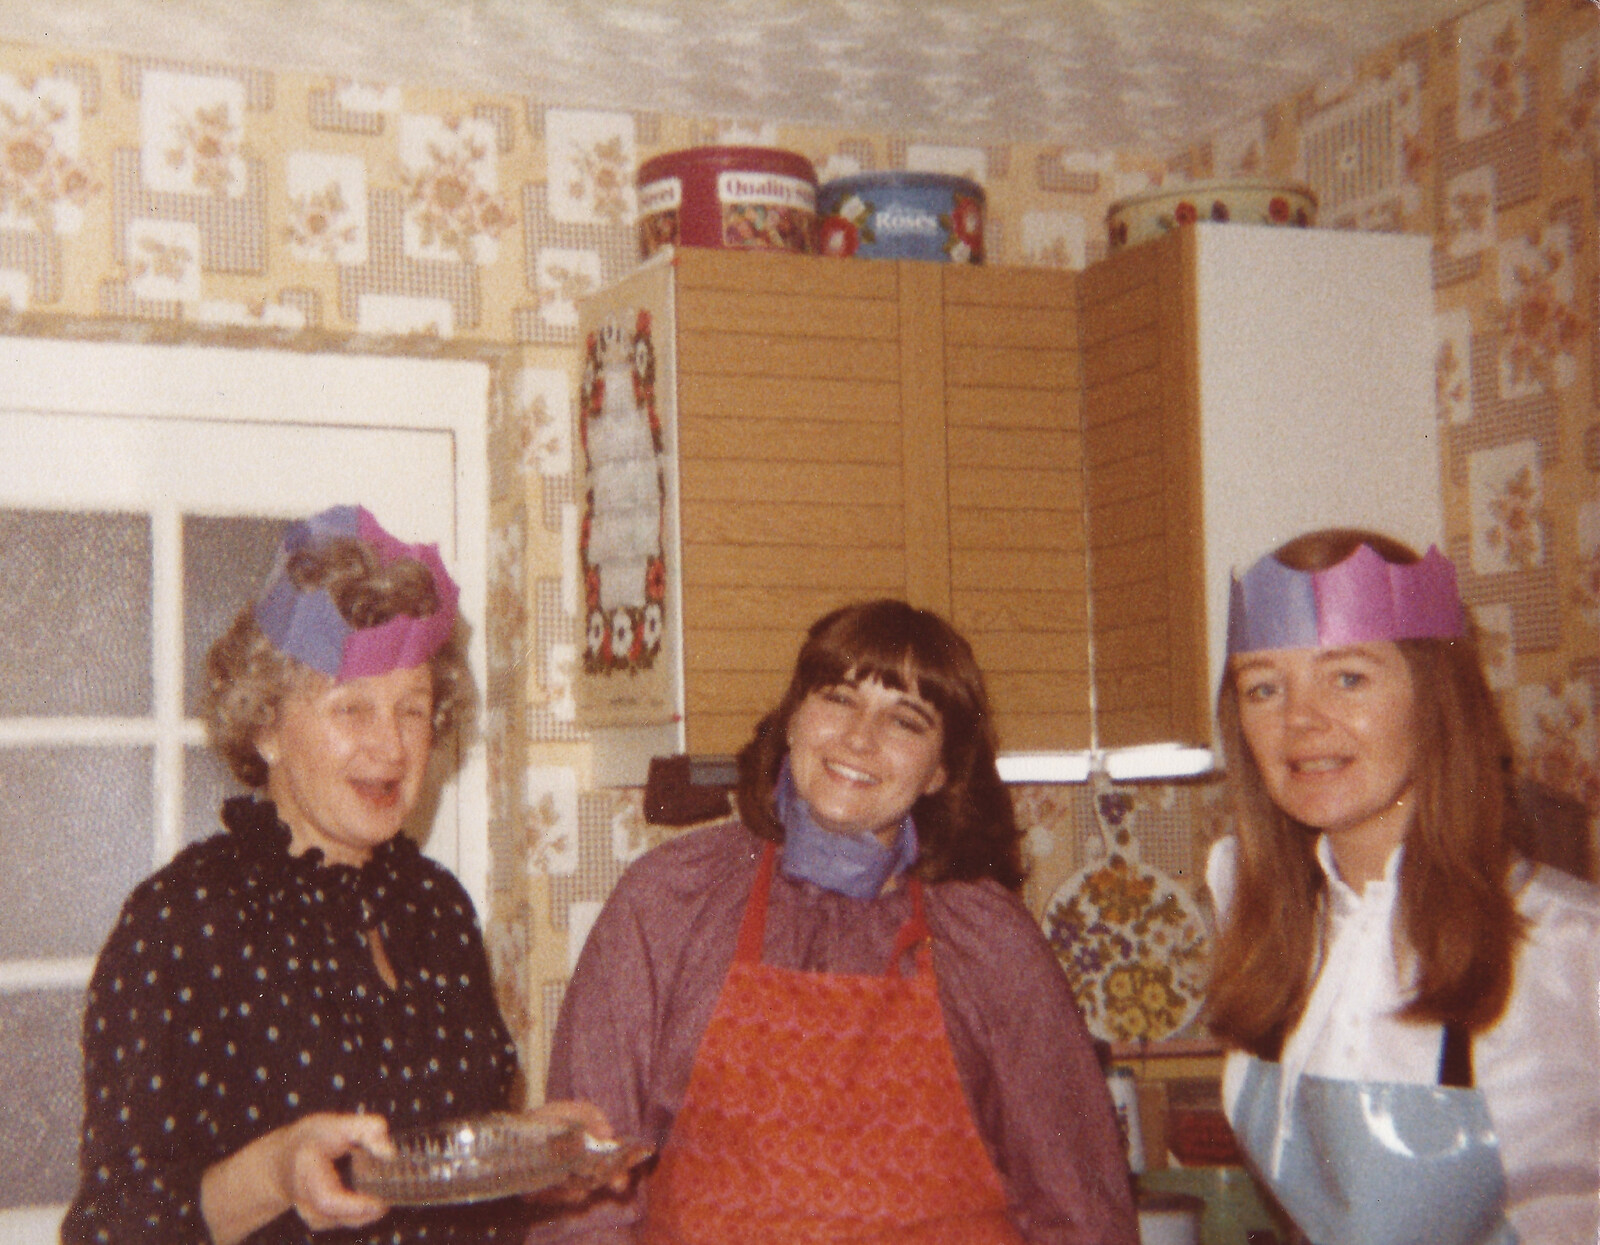 Family History: The 1980s - 24th January 2020: Grandmother, Caroline and Mother round N&C's for Christmas